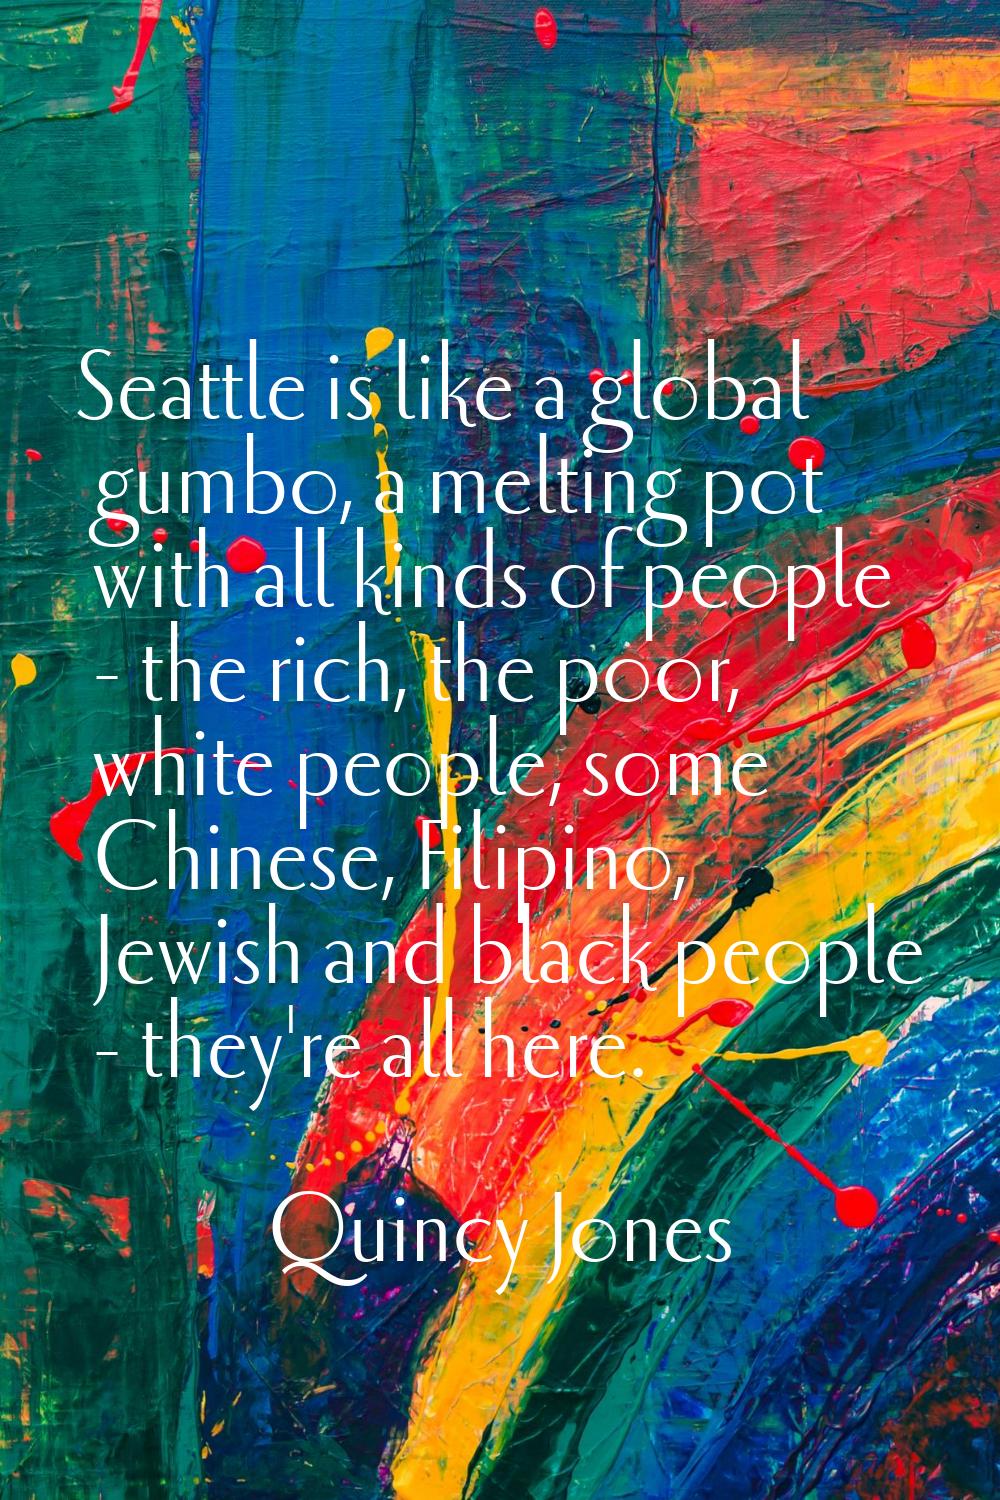 Seattle is like a global gumbo, a melting pot with all kinds of people - the rich, the poor, white 